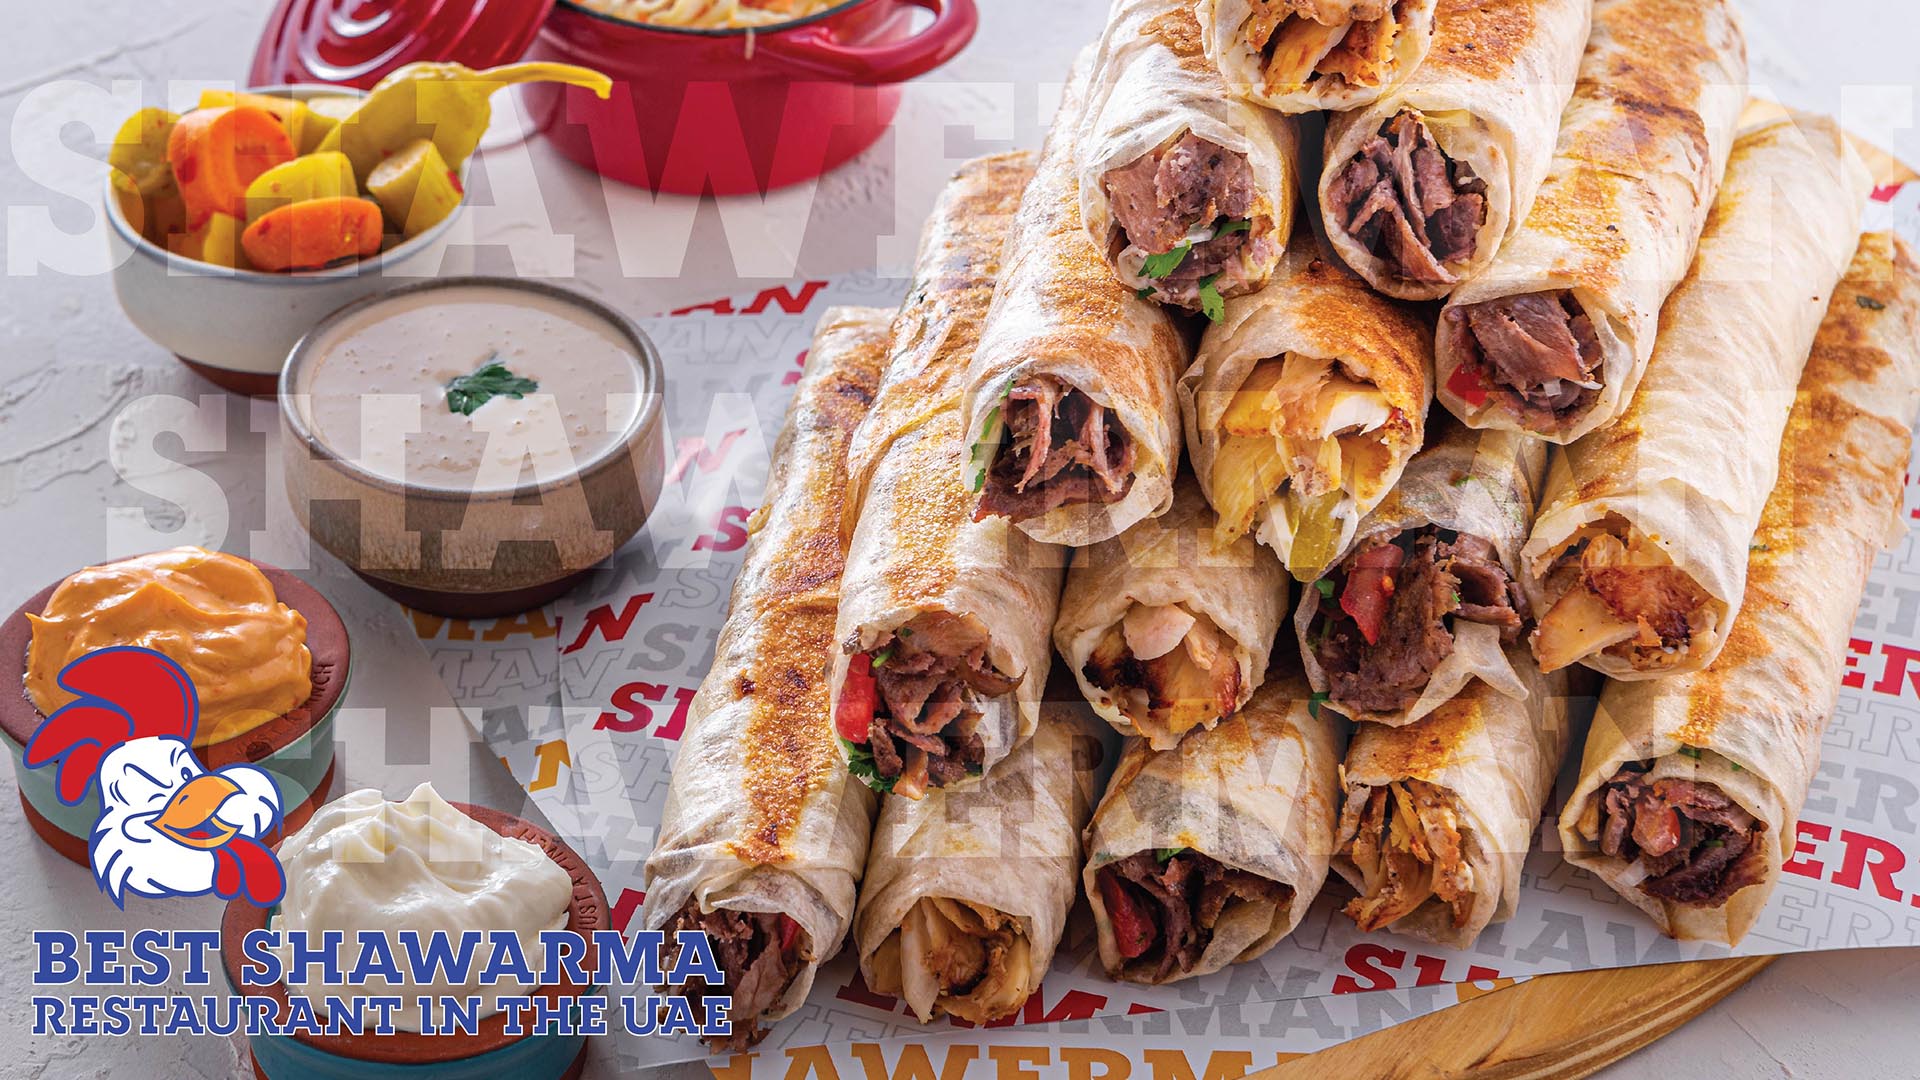 Grab Exclusive Offers and Discounts: Get Our Tasty Shawarma in the UAE at a Reasonable Price